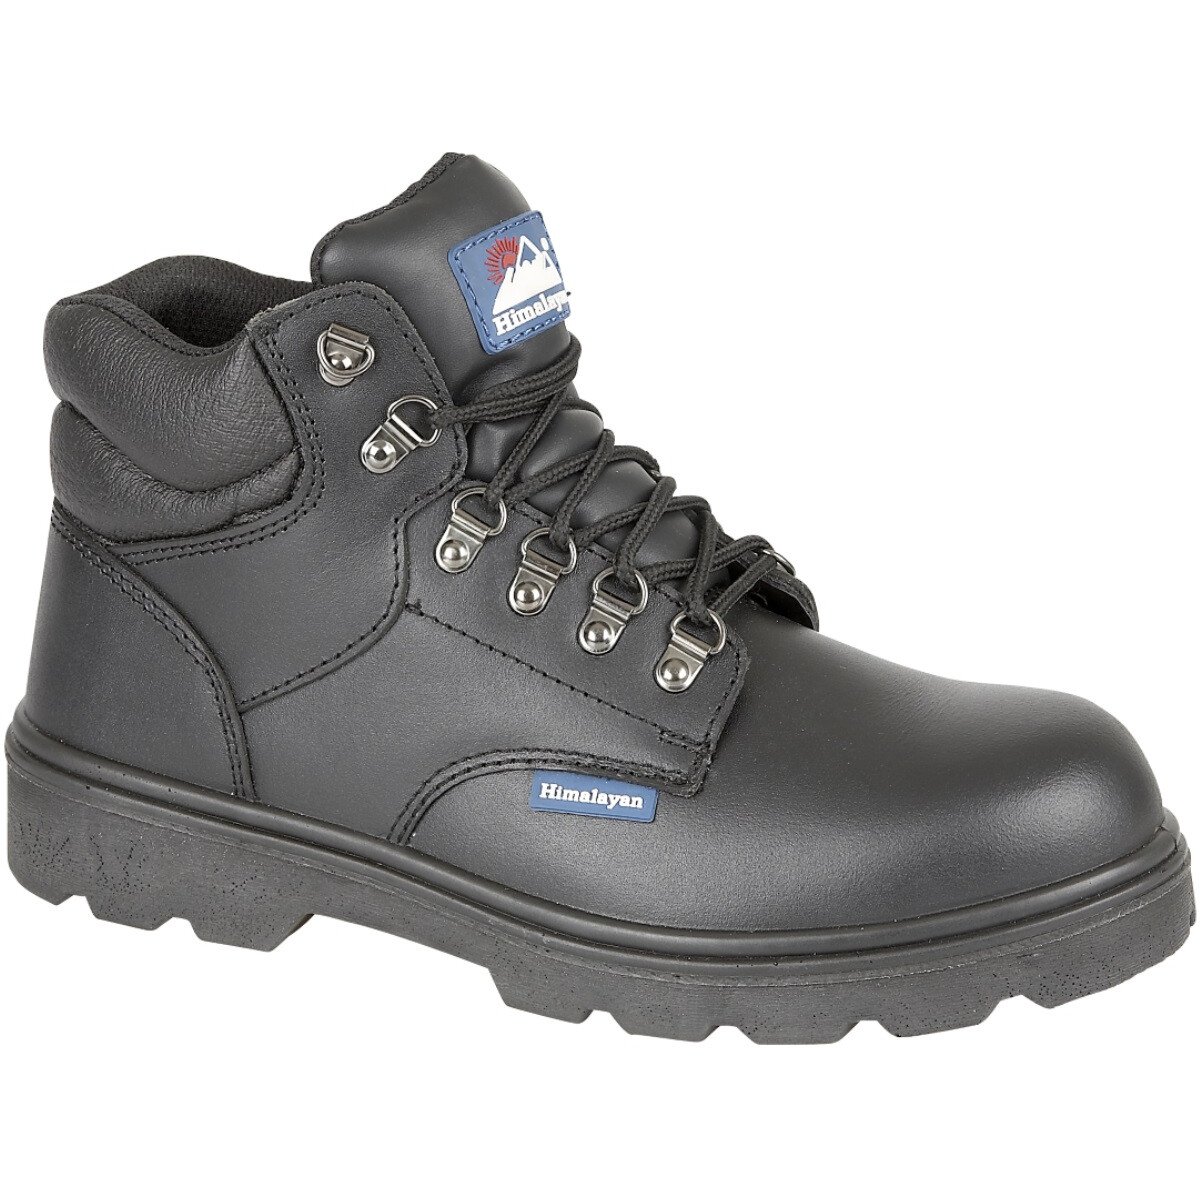 Himalayan 5220 Fully Waterproof Safety Black Boot S3 SRC from Lawson HIS